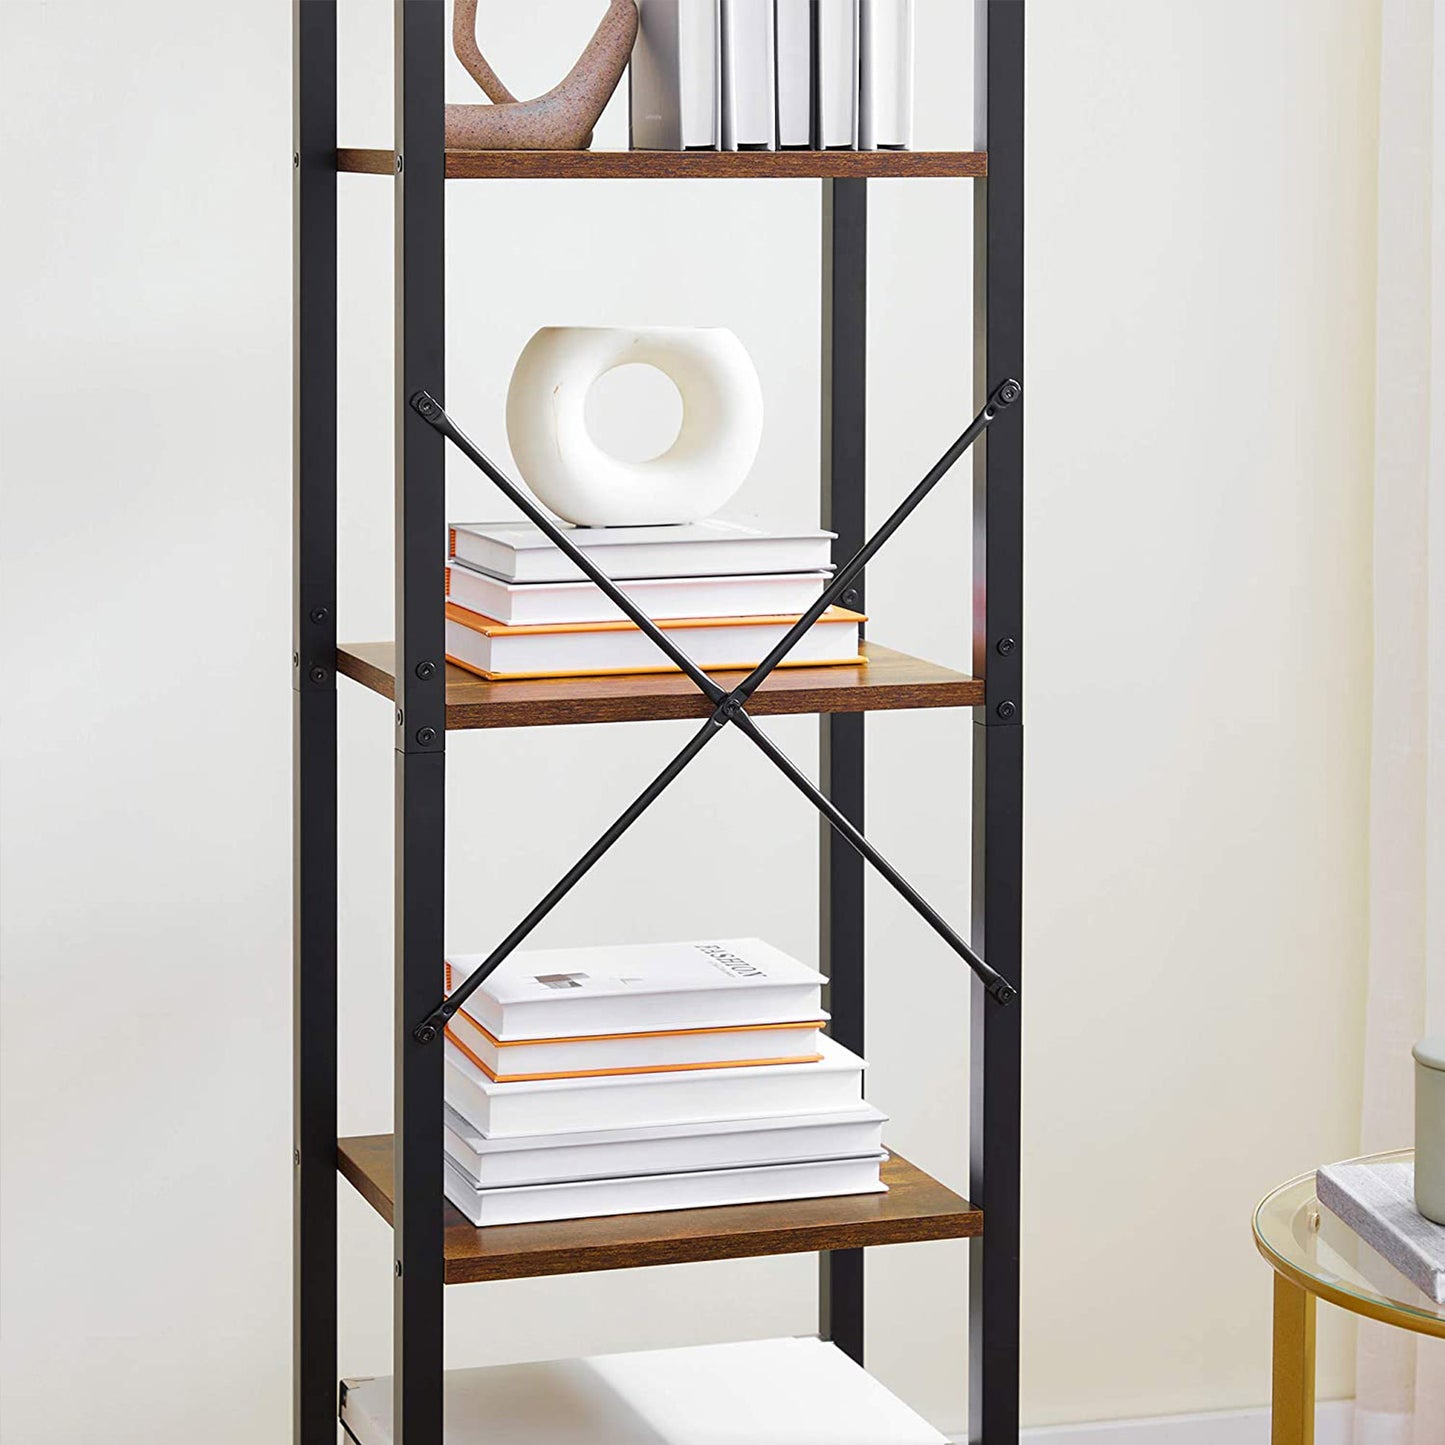 Bookcase in a vintage brown and black design